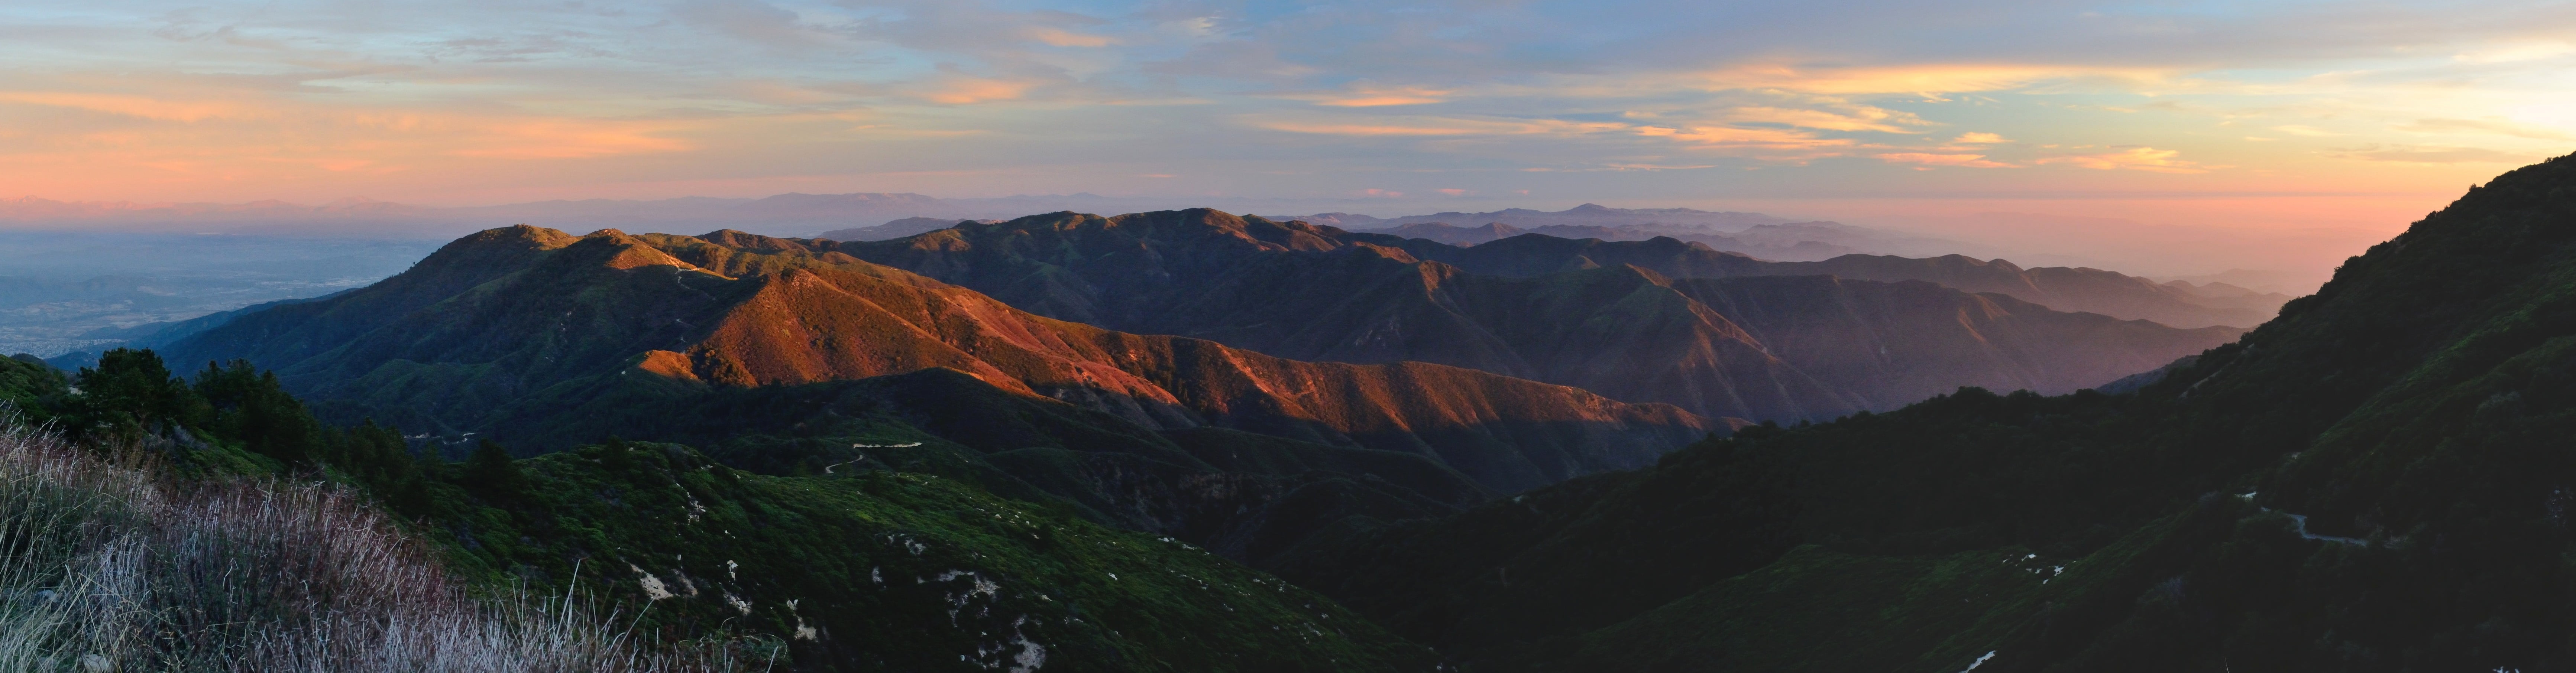 landscape photography of brown mountains under cloudy sky during golden hour, santiago peak